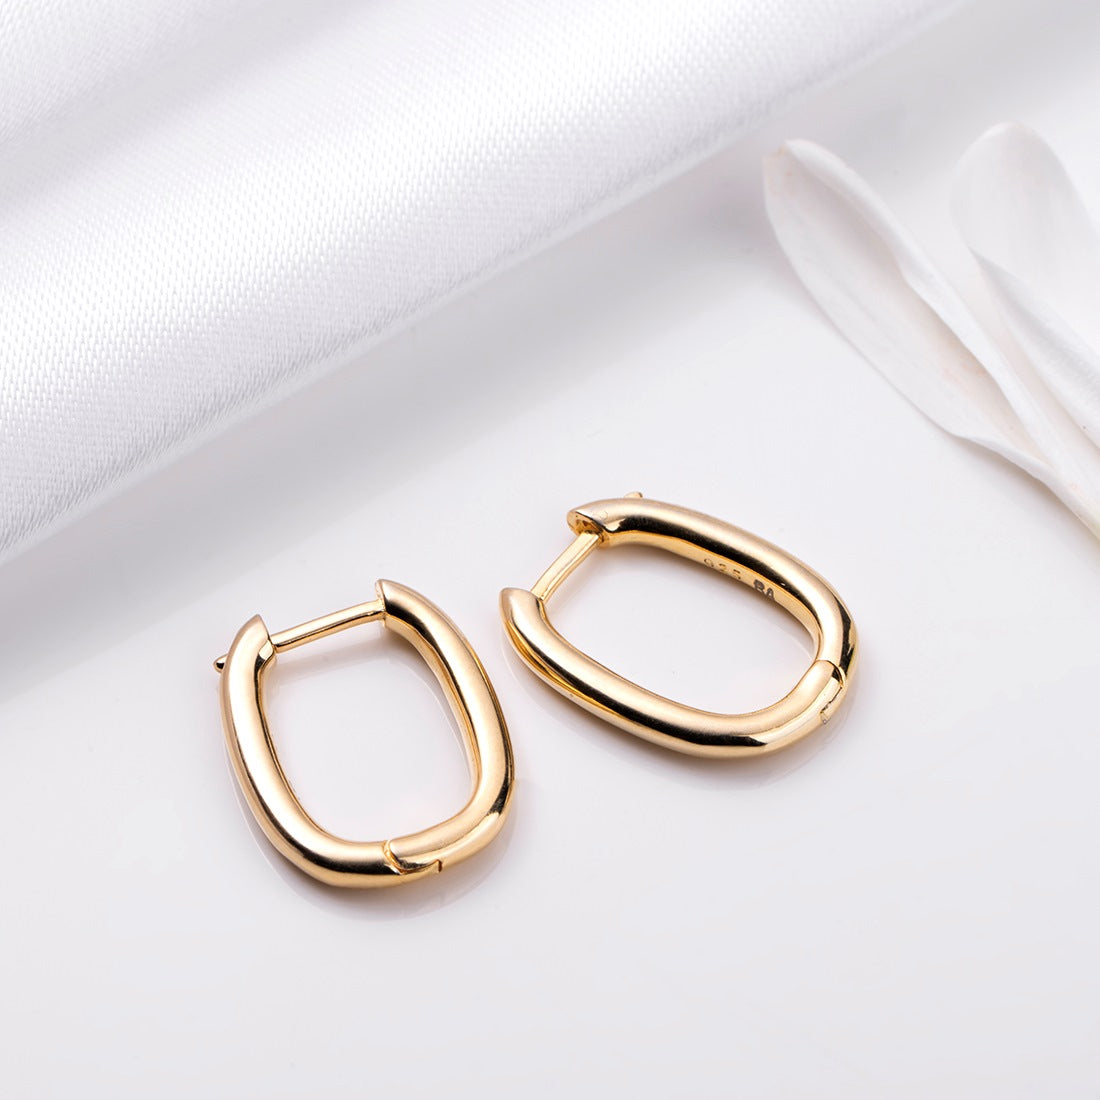 Radiant Hoops 925 Sterling Silver Gold-Plated Earrings